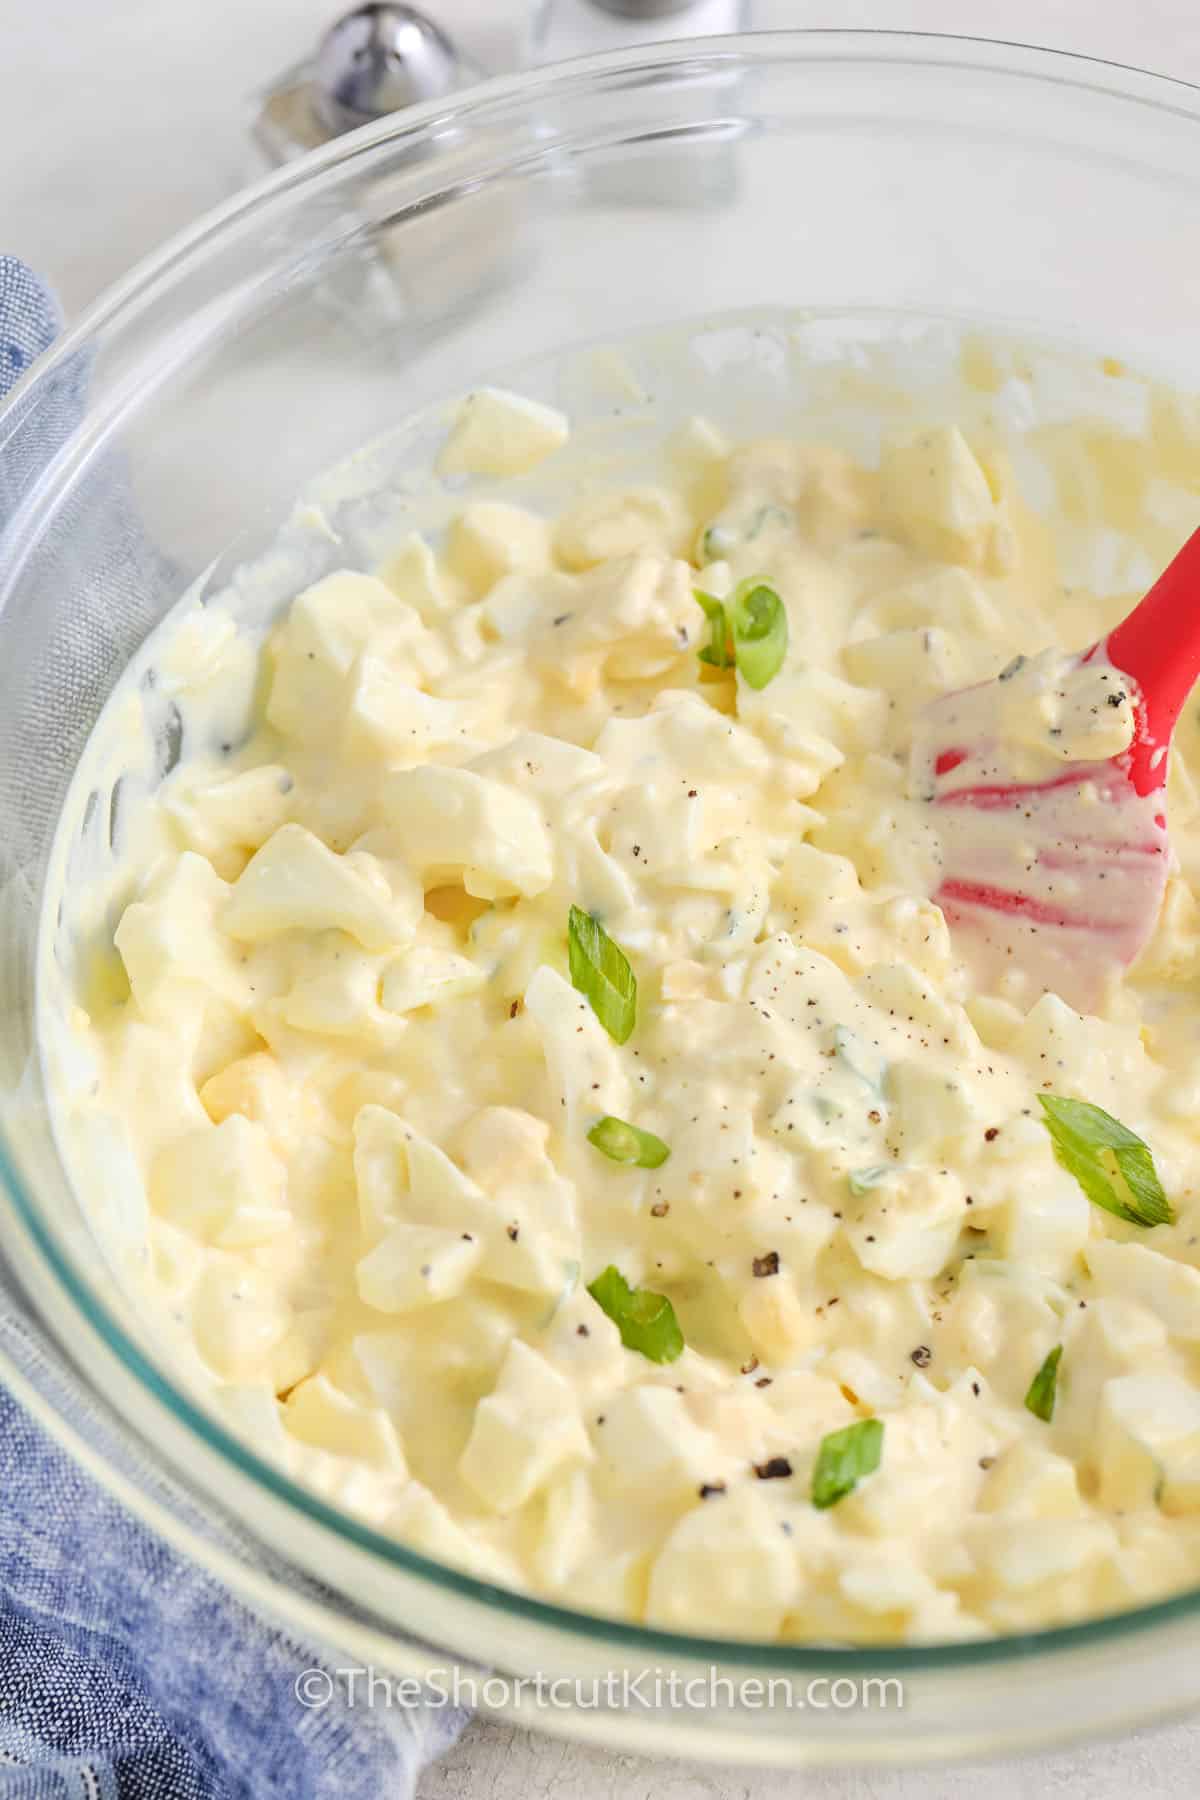 the best egg salad recipe in a clear mixing bowl, and garnished with sliced green onion